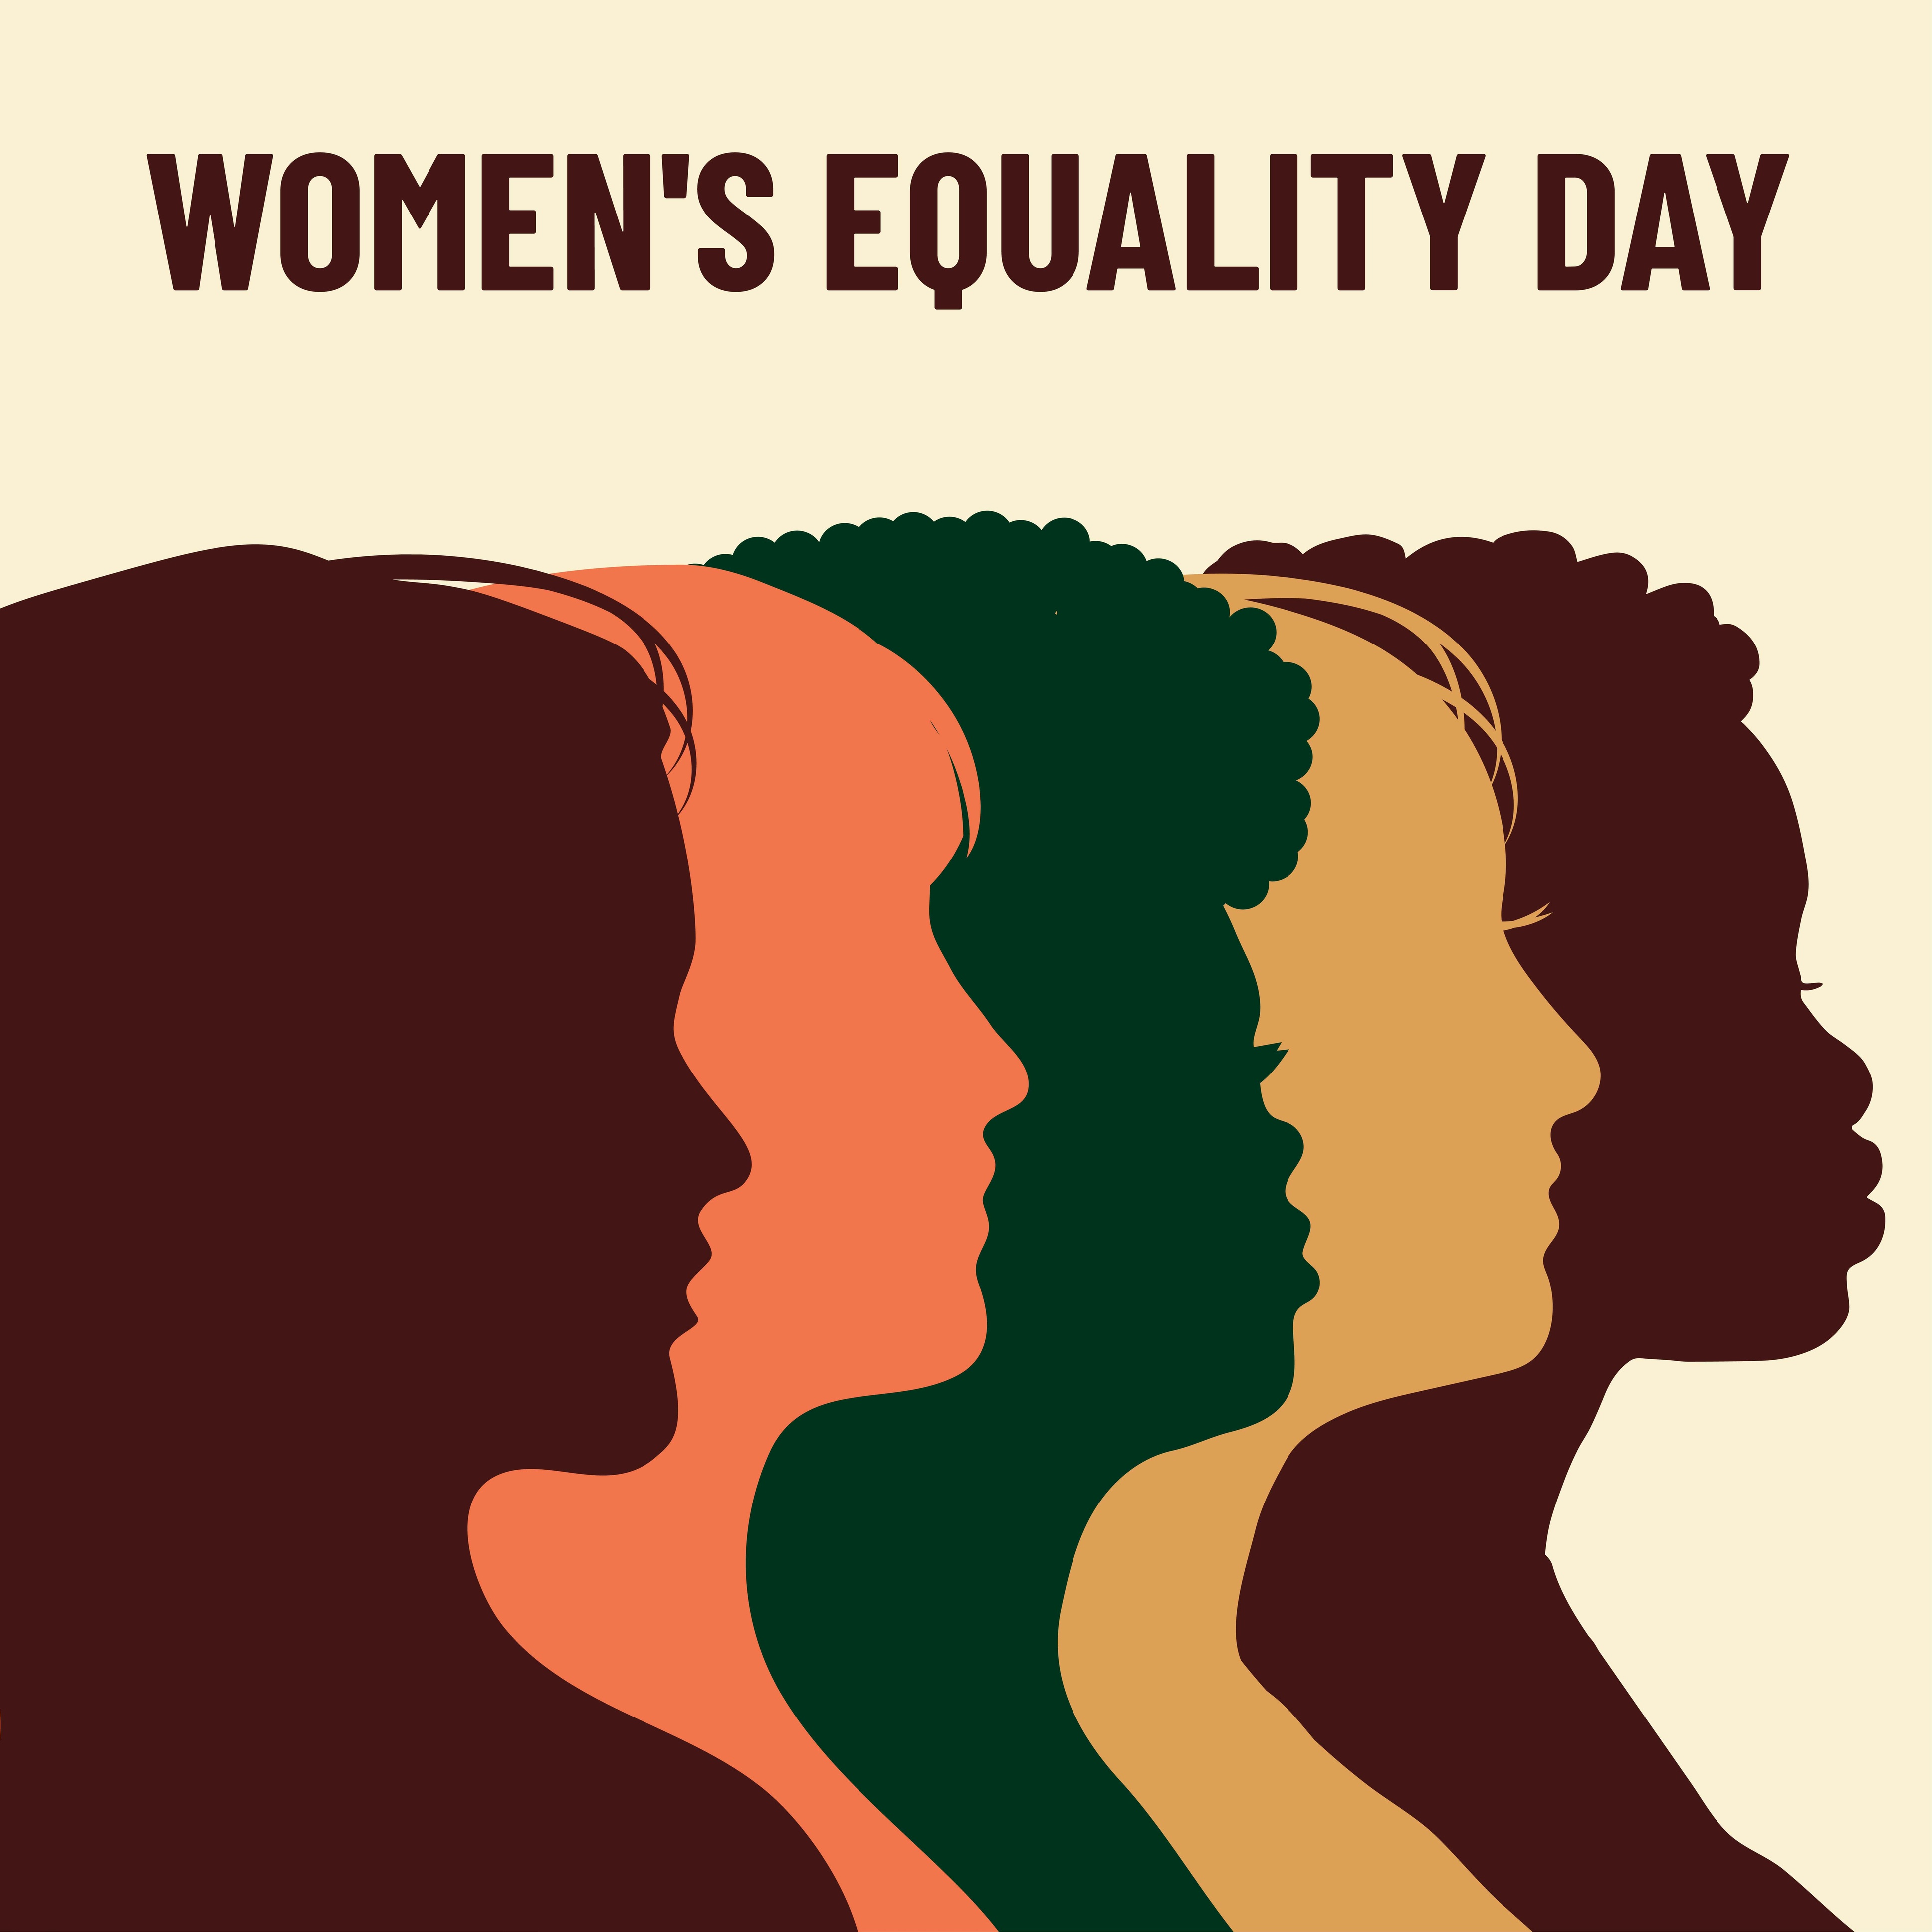 Women’s Equality Day Celebrating Women’s Rebranding and Rediscovery